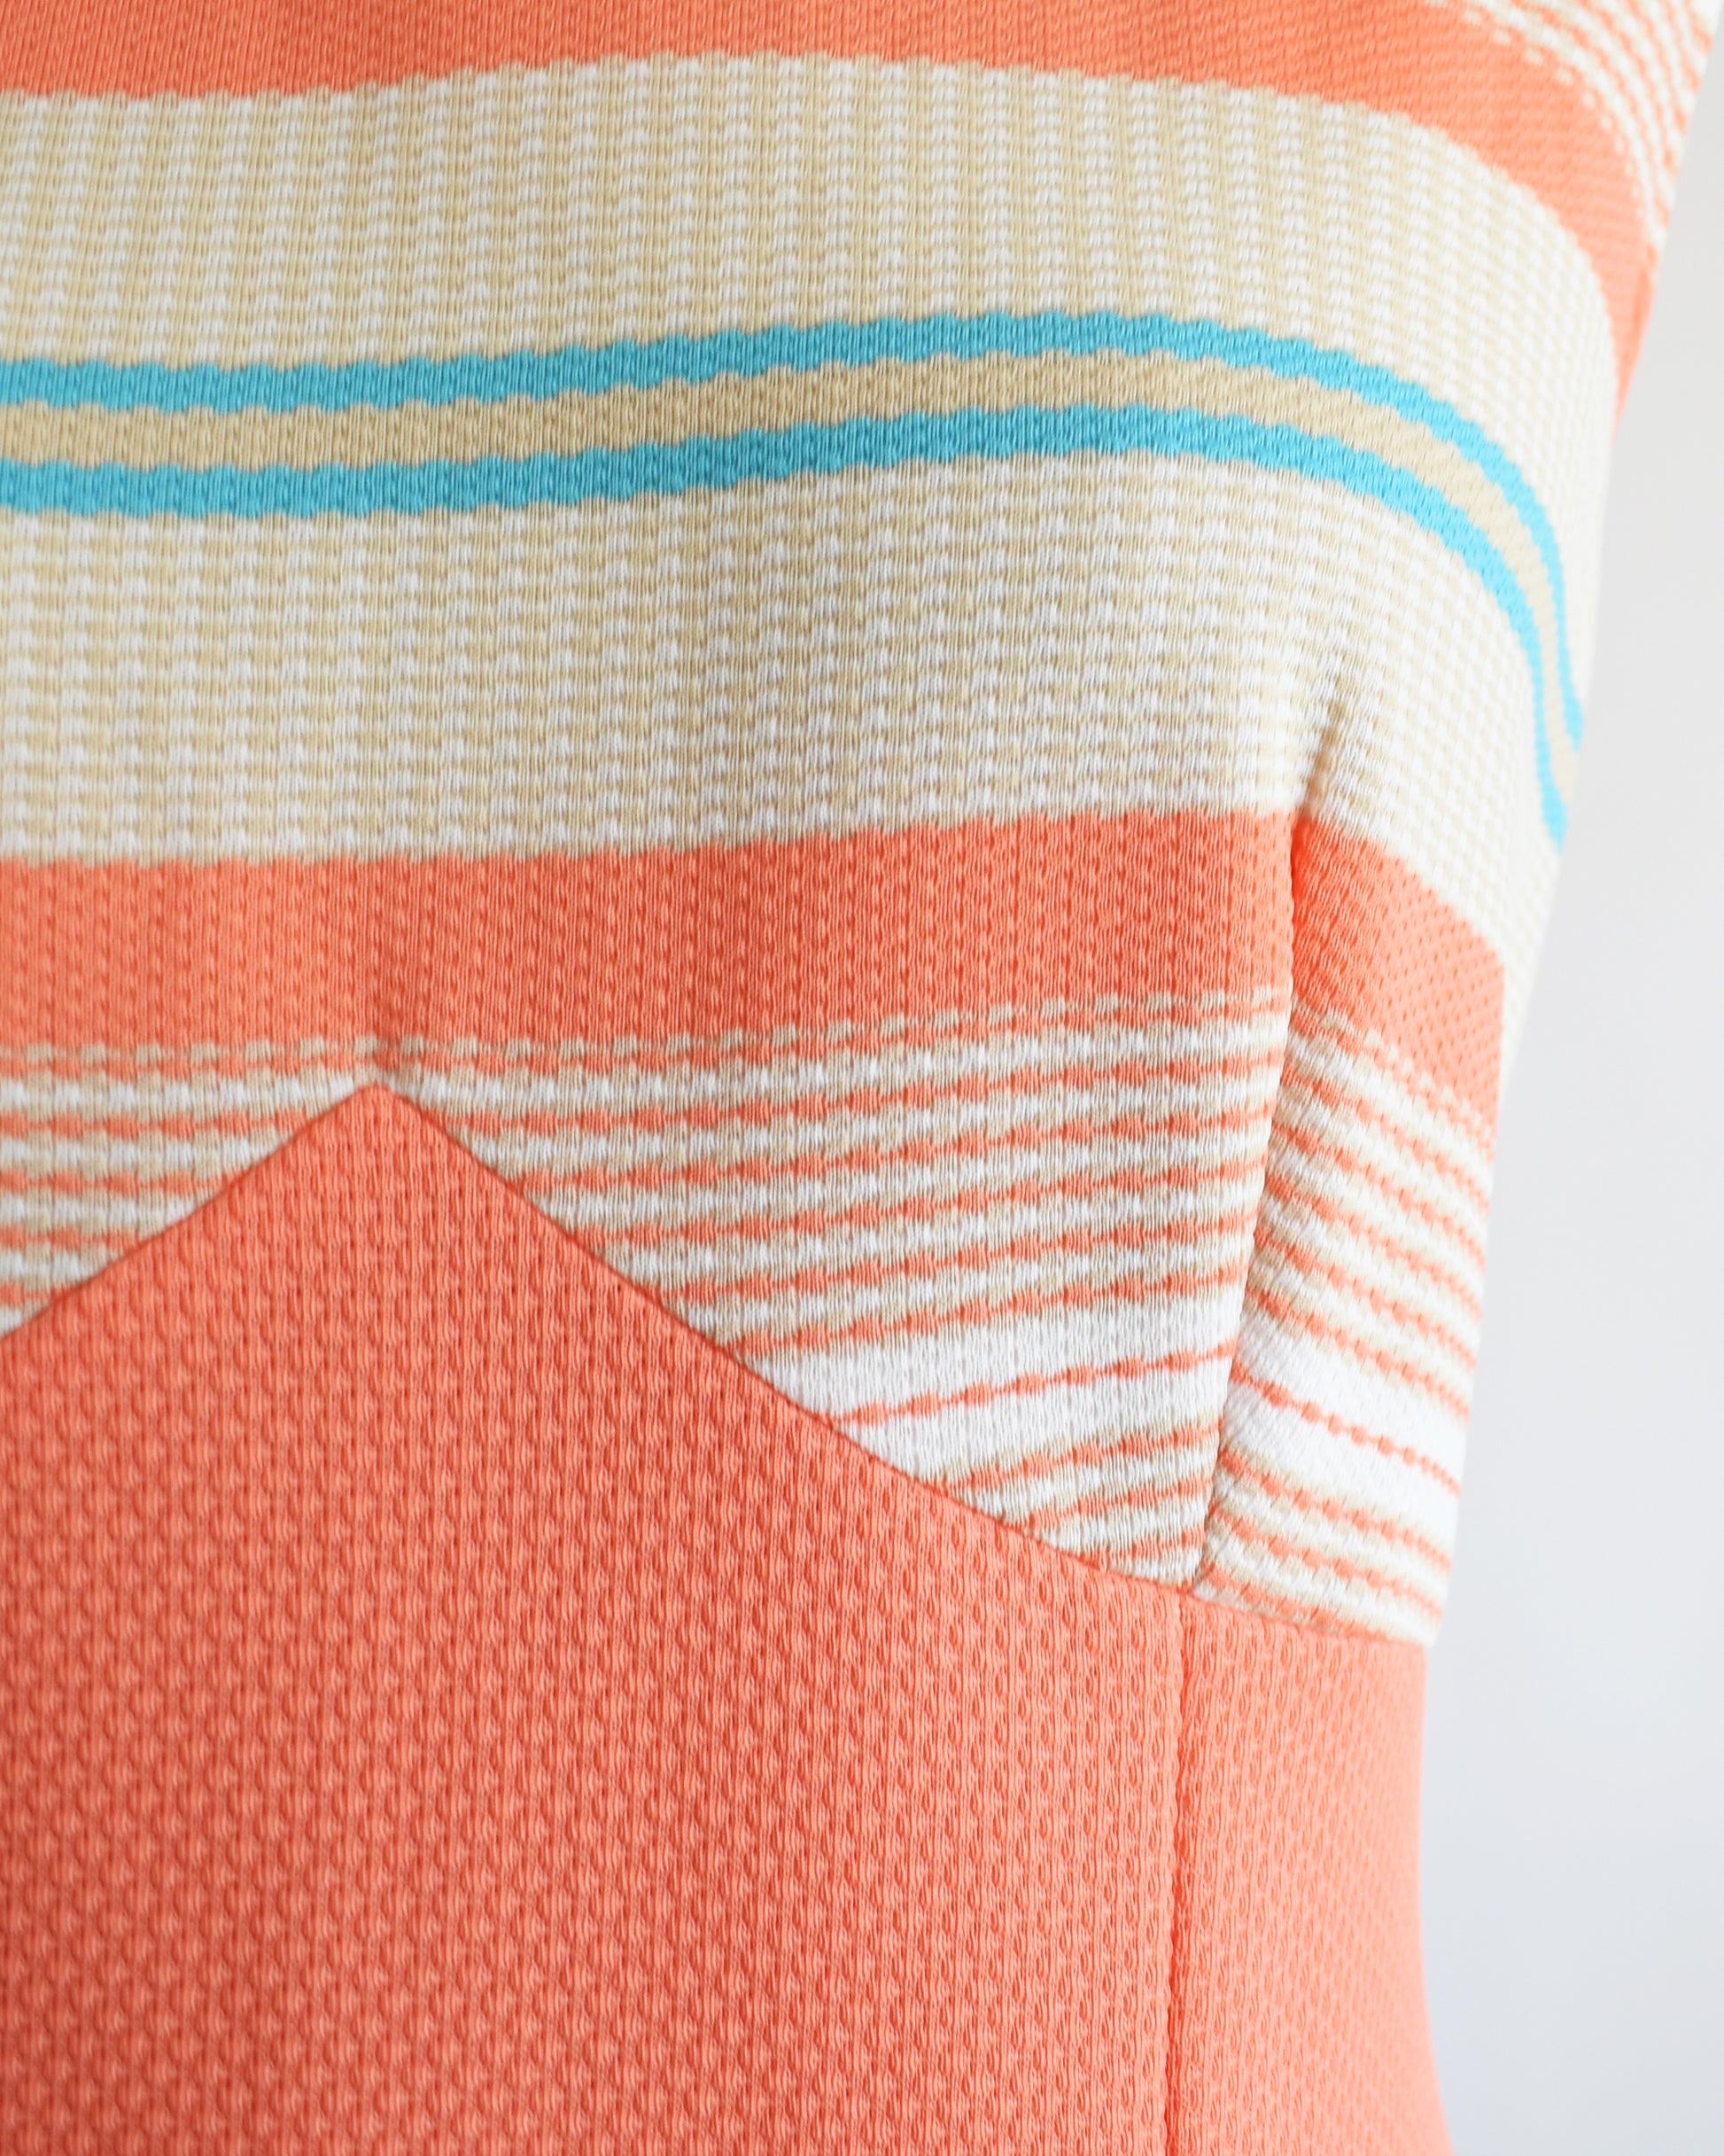 Close up of the bodice of the dress which shows the horizontal stripes